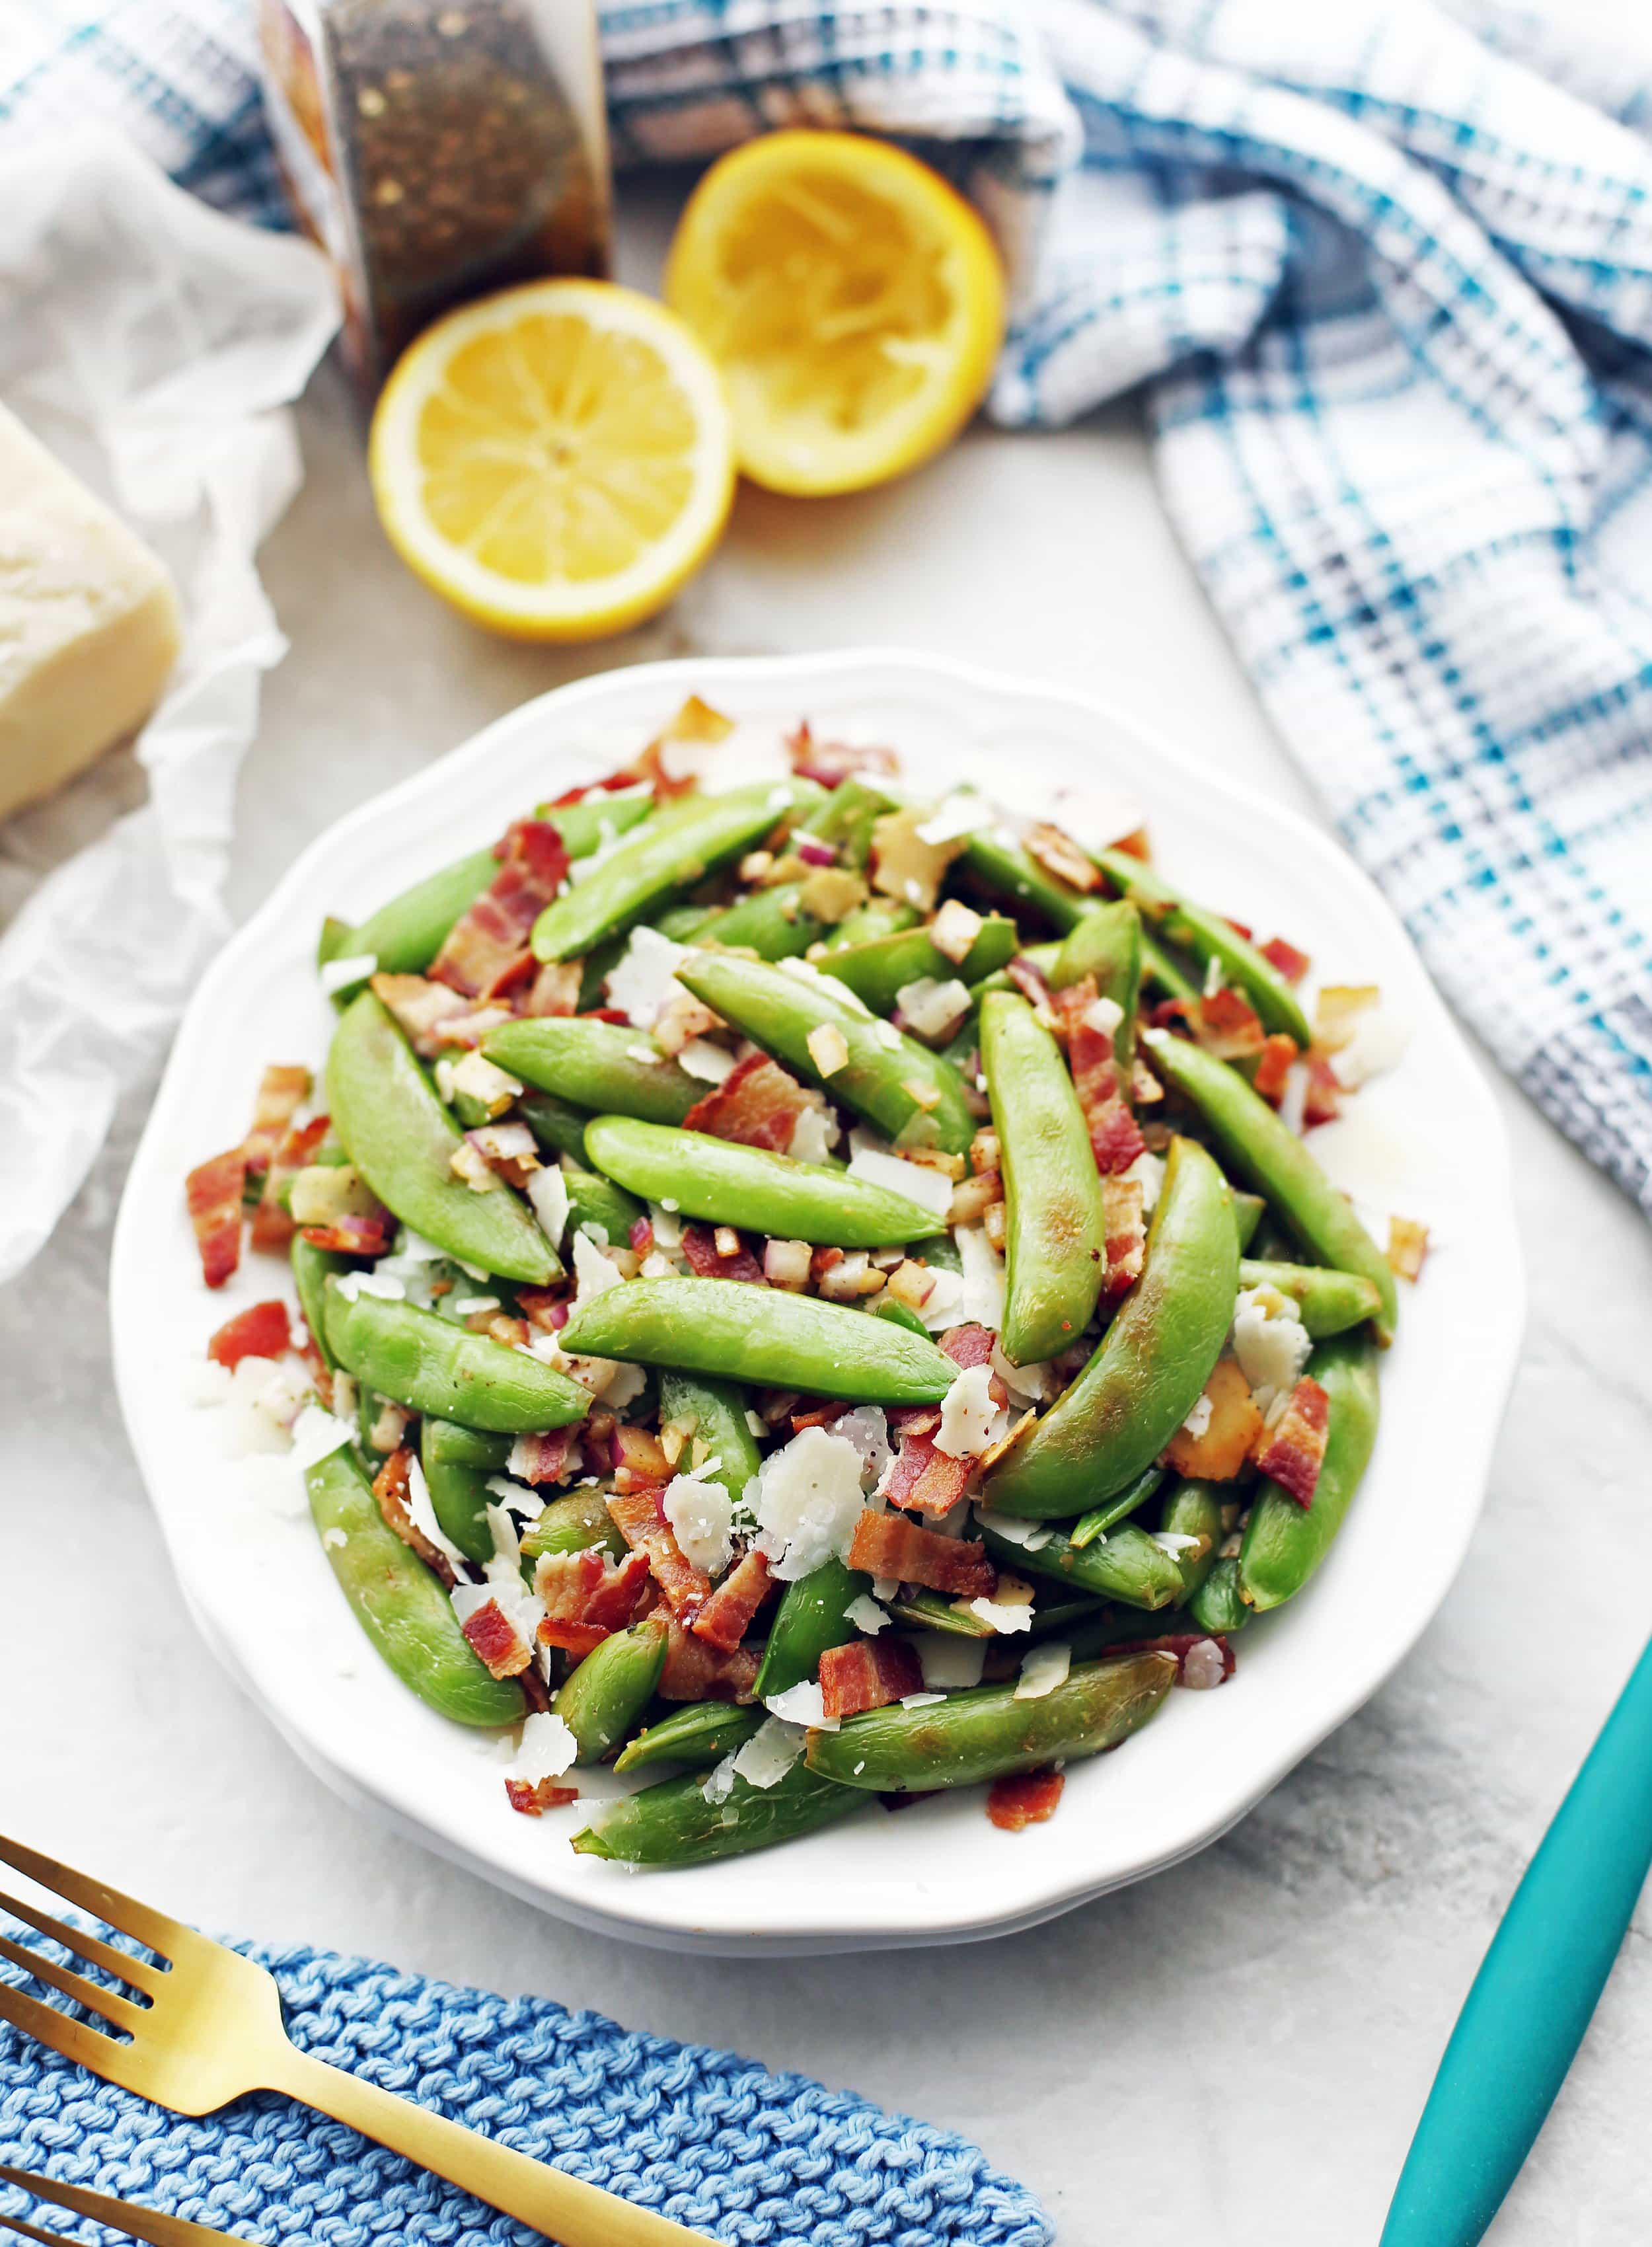 Sugar snap peas with bacon and parmesan piled on a white plate.